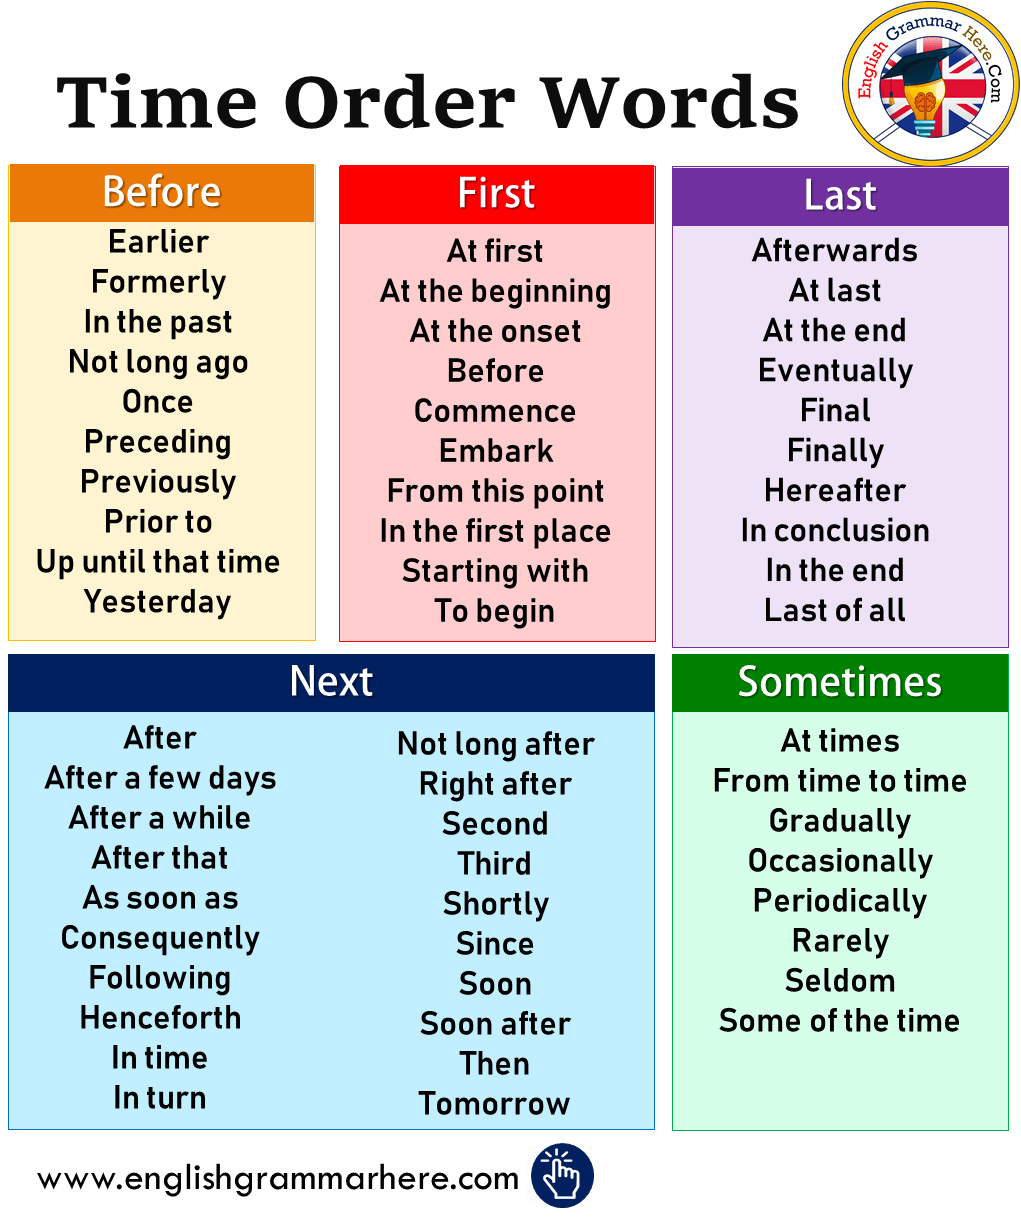 Time Order Words in English